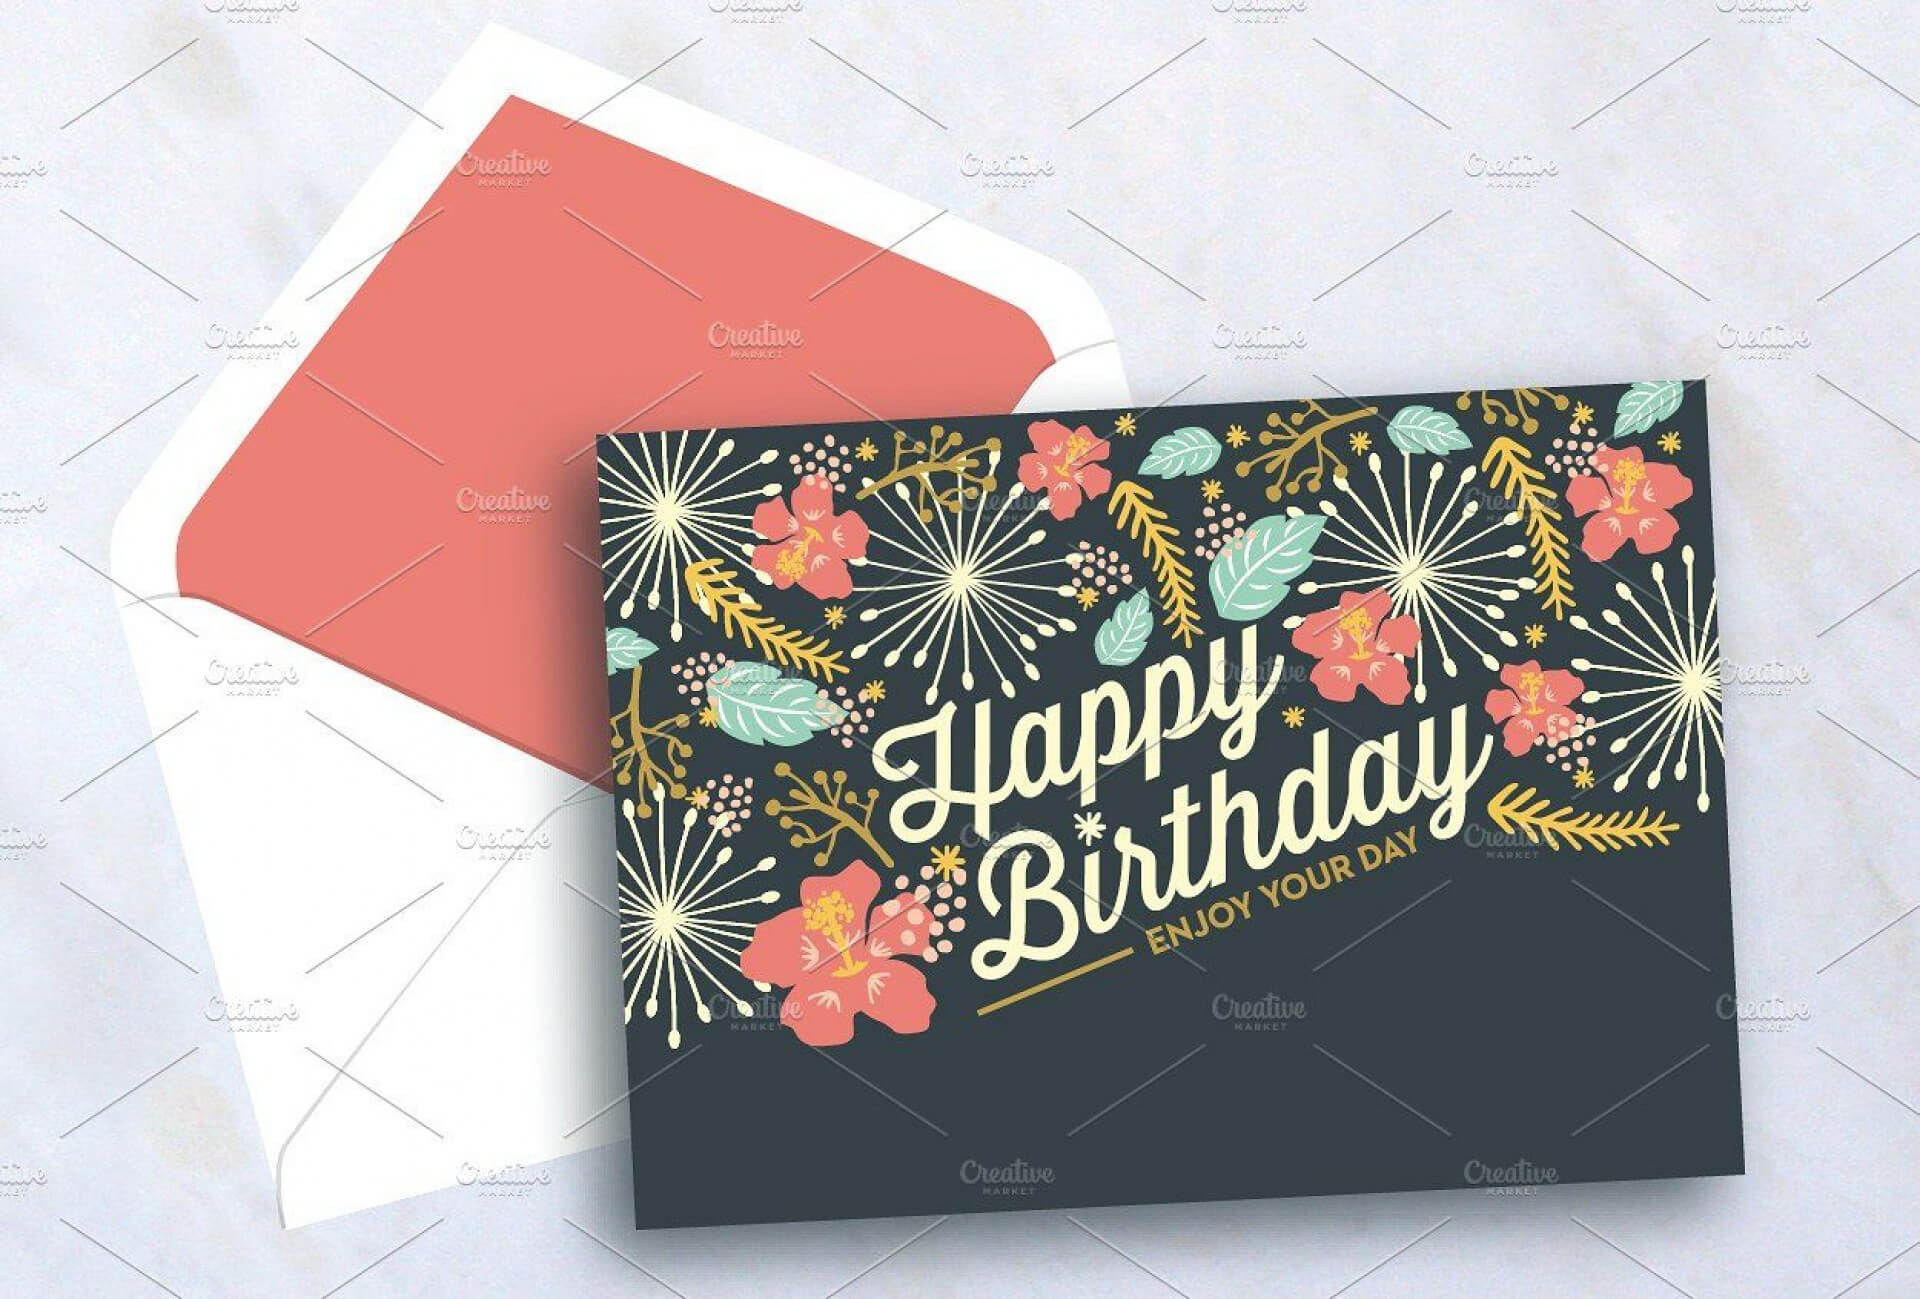 002 Quarter Fold Card Template Photoshop Indesign Greeting Intended For Birthday Card Template Indesign